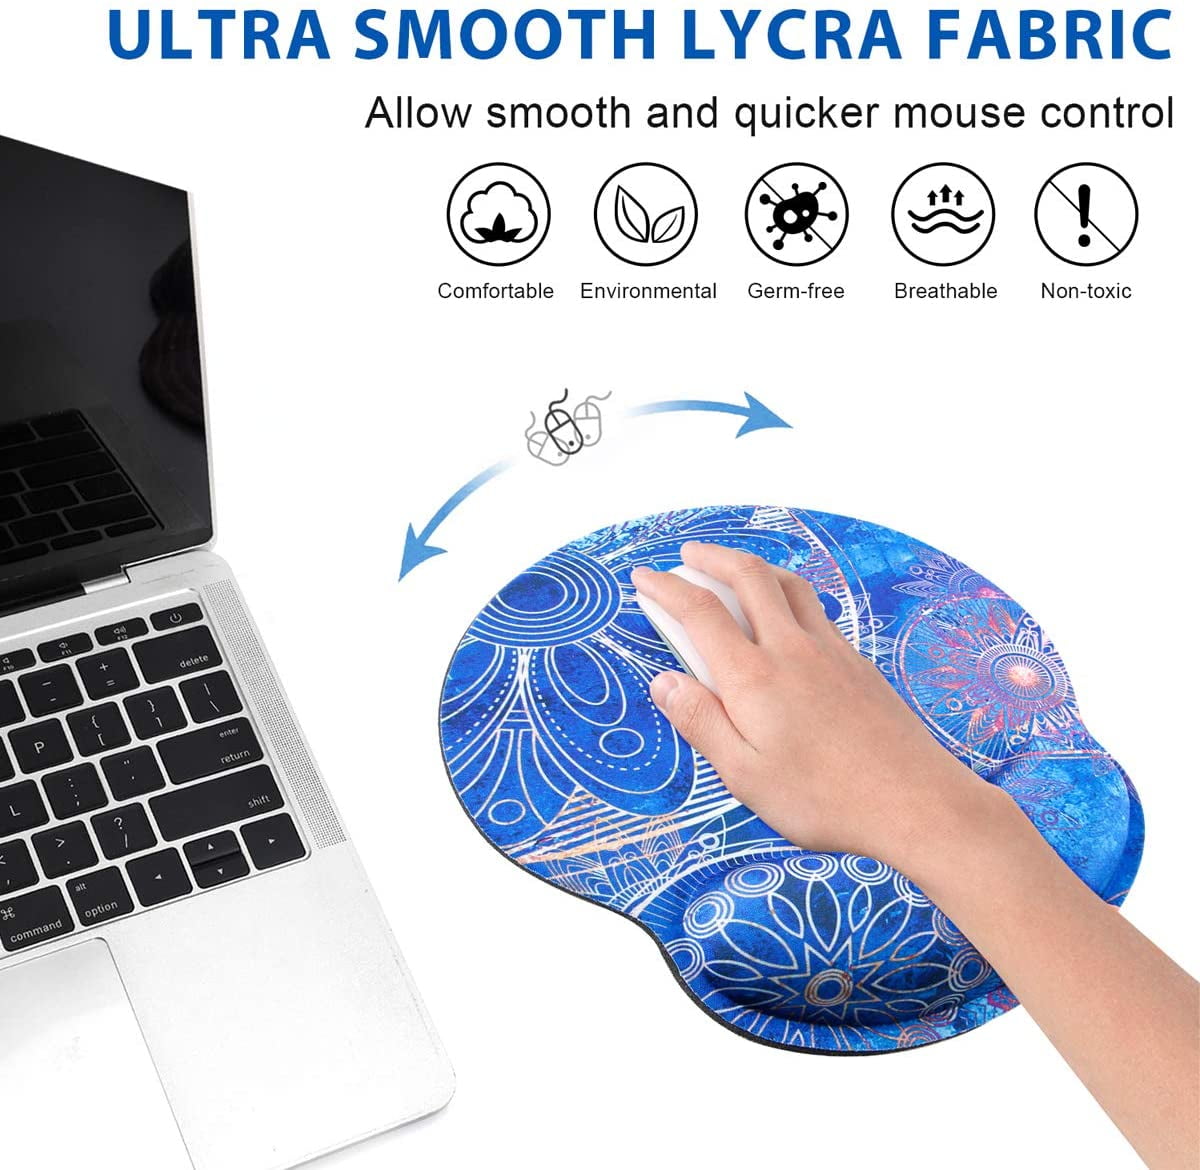 Ergonomic Mouse Pad Wrist Rest Support Mouse Wrist Rest Pad for Laptop Computer Home Office Working Pain Relief ToLuLu Gel Mouse Pads with Non-Slip Rubber Base Memory Foam Mousepad Blue Mandala